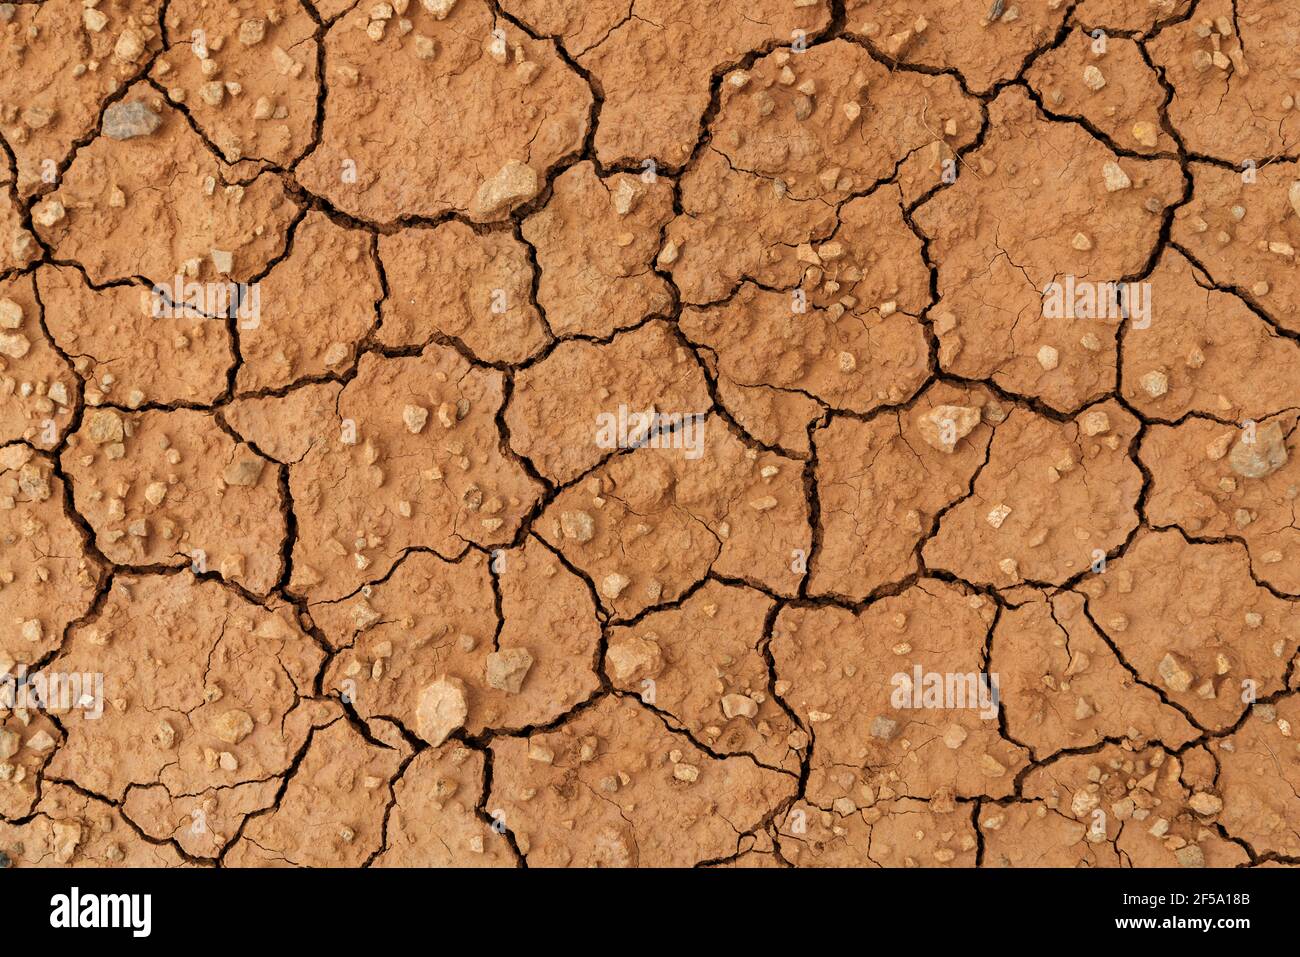 Parched and cracked soil Stock Photo